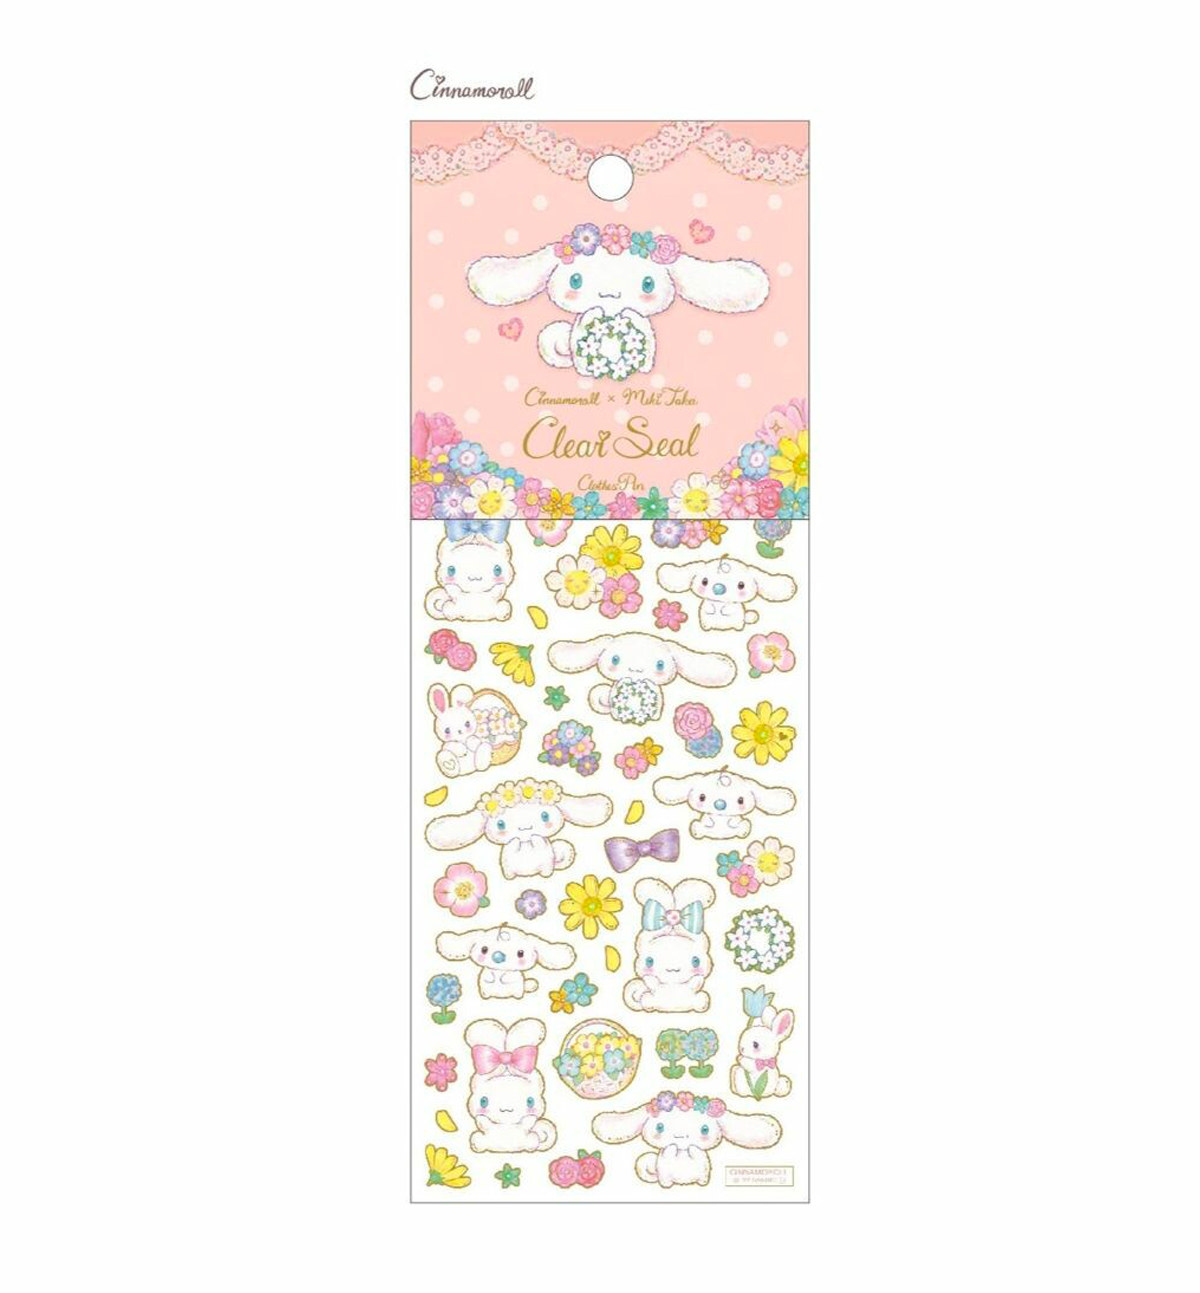 Cinnamoroll x Miki Takei Clear Seal Sticker [Foil Stamping]